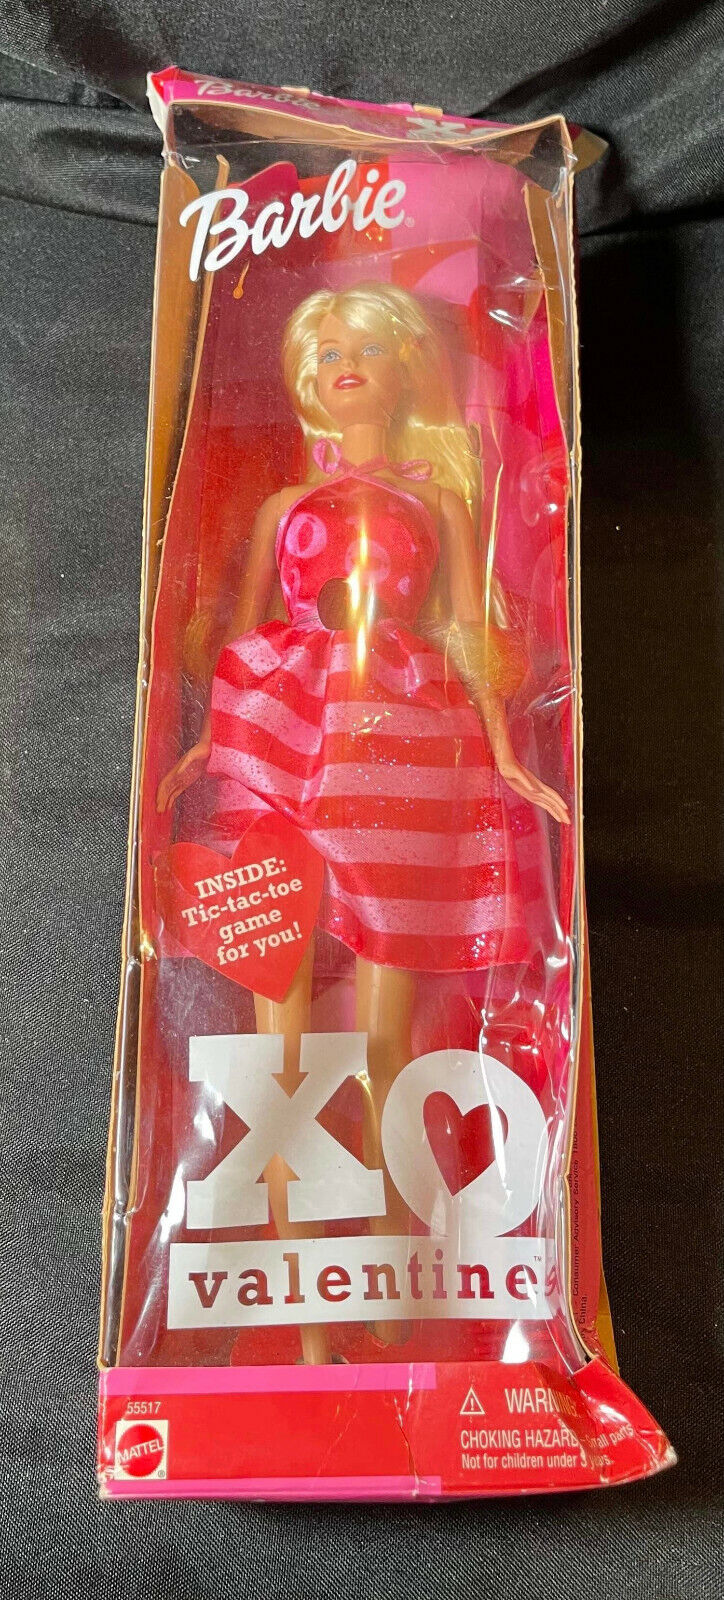 Barbie XO Valentine with Tic-tac-toe Game for You 2002 Mattel